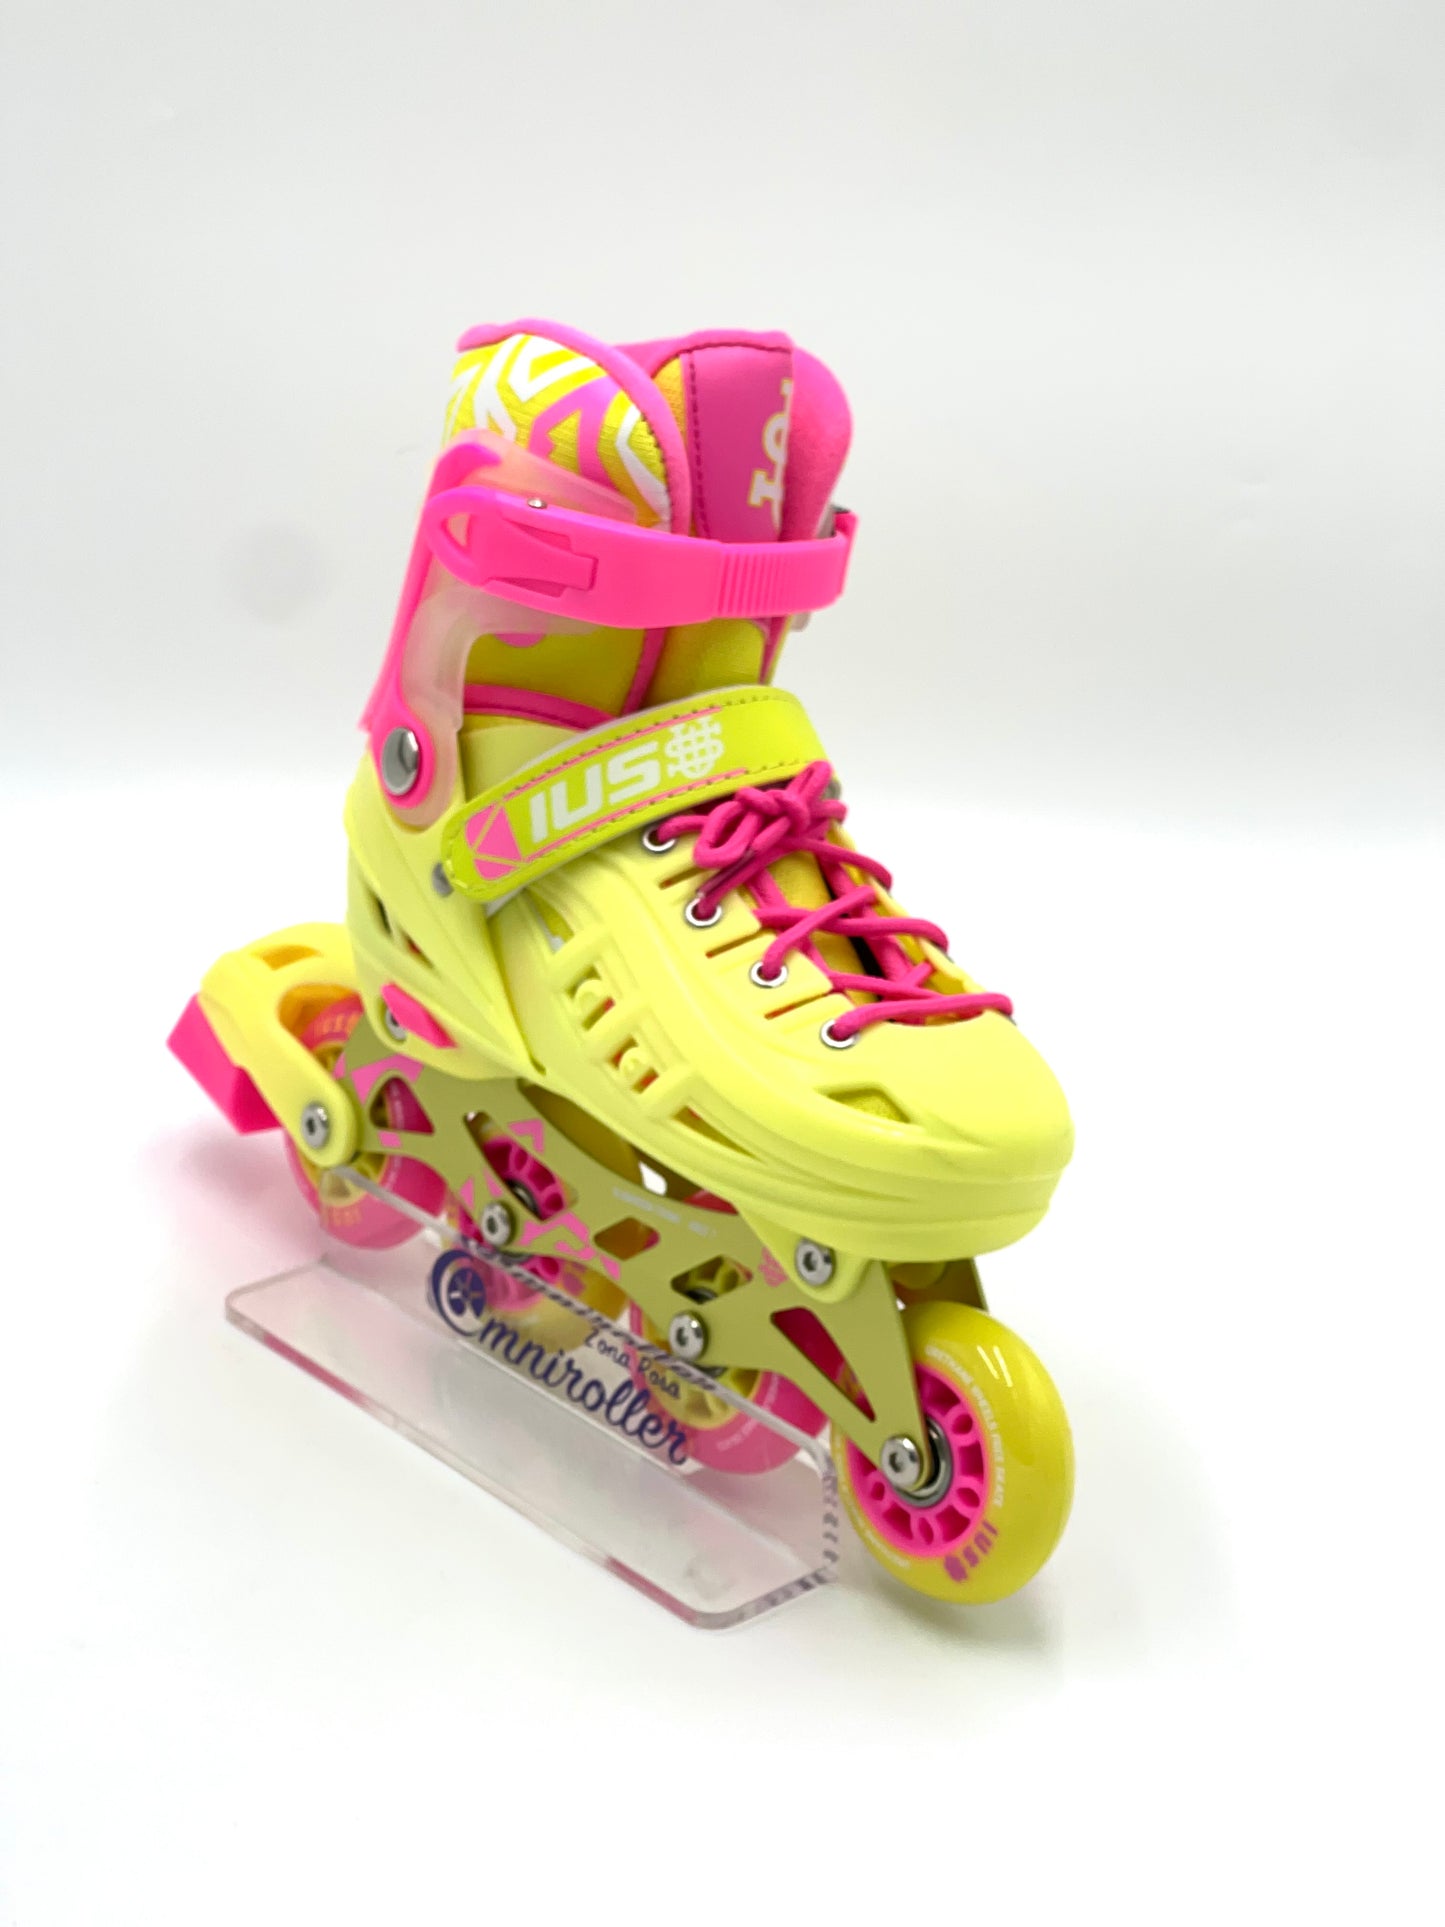 Adjustable Fitness Skates Kit with IUS Protections Pink Yellow